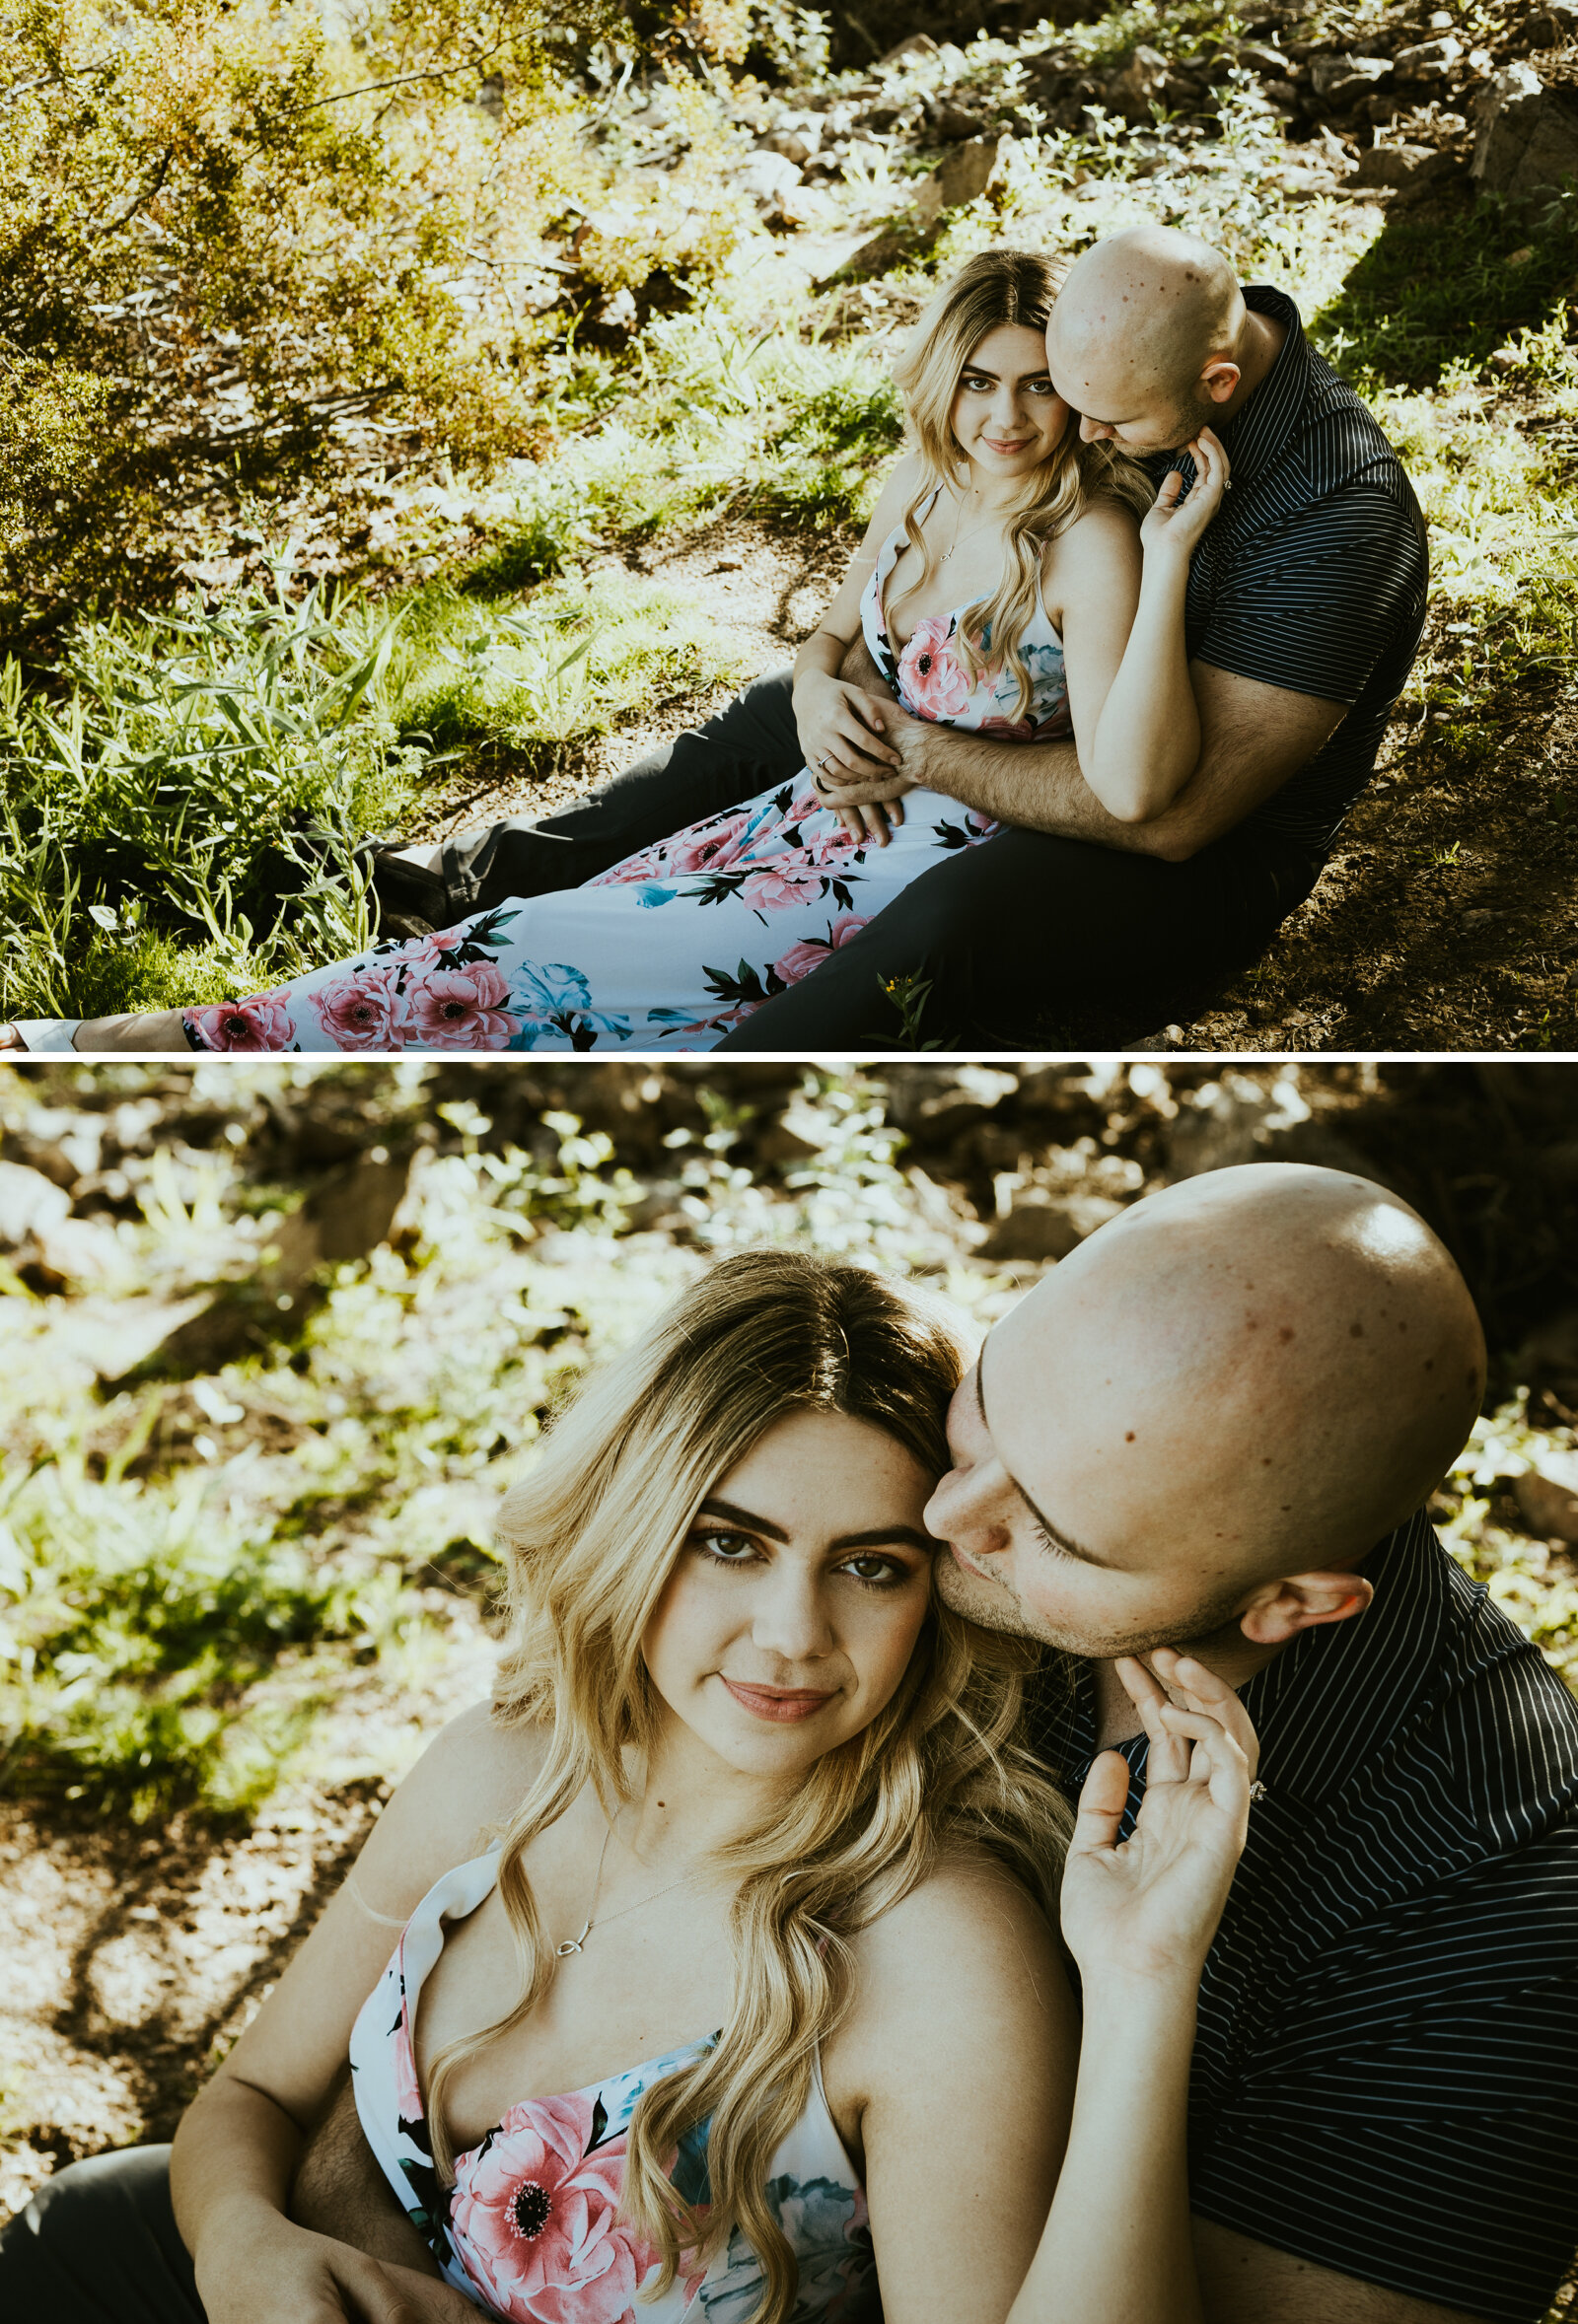 lake pleasant peoria arizona couple photos anniversary pictures engagement outfit inspo summer couple posing ideas baby announcement images12.jpg